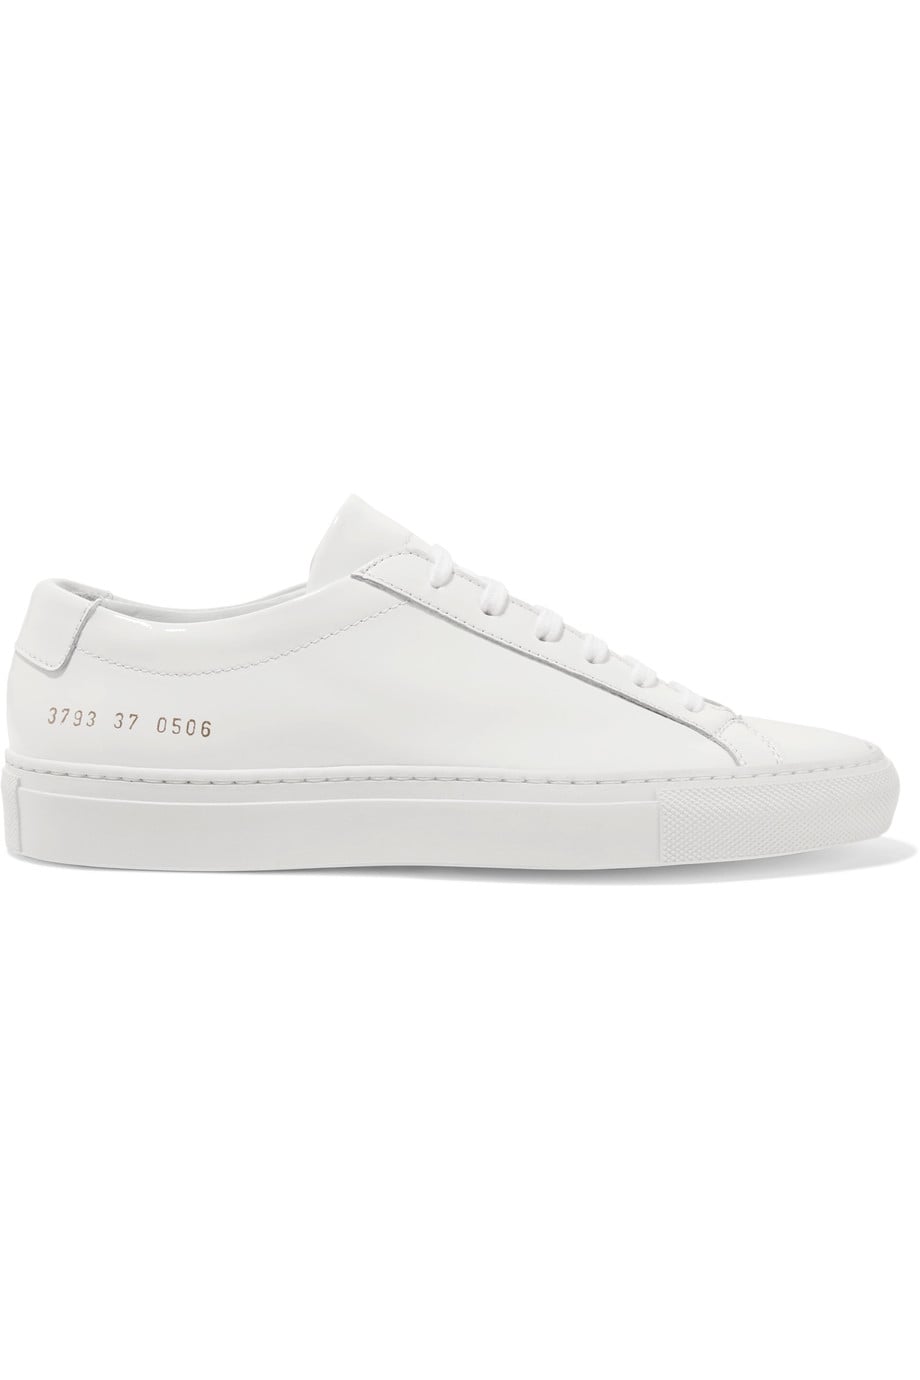 patent leather common projects